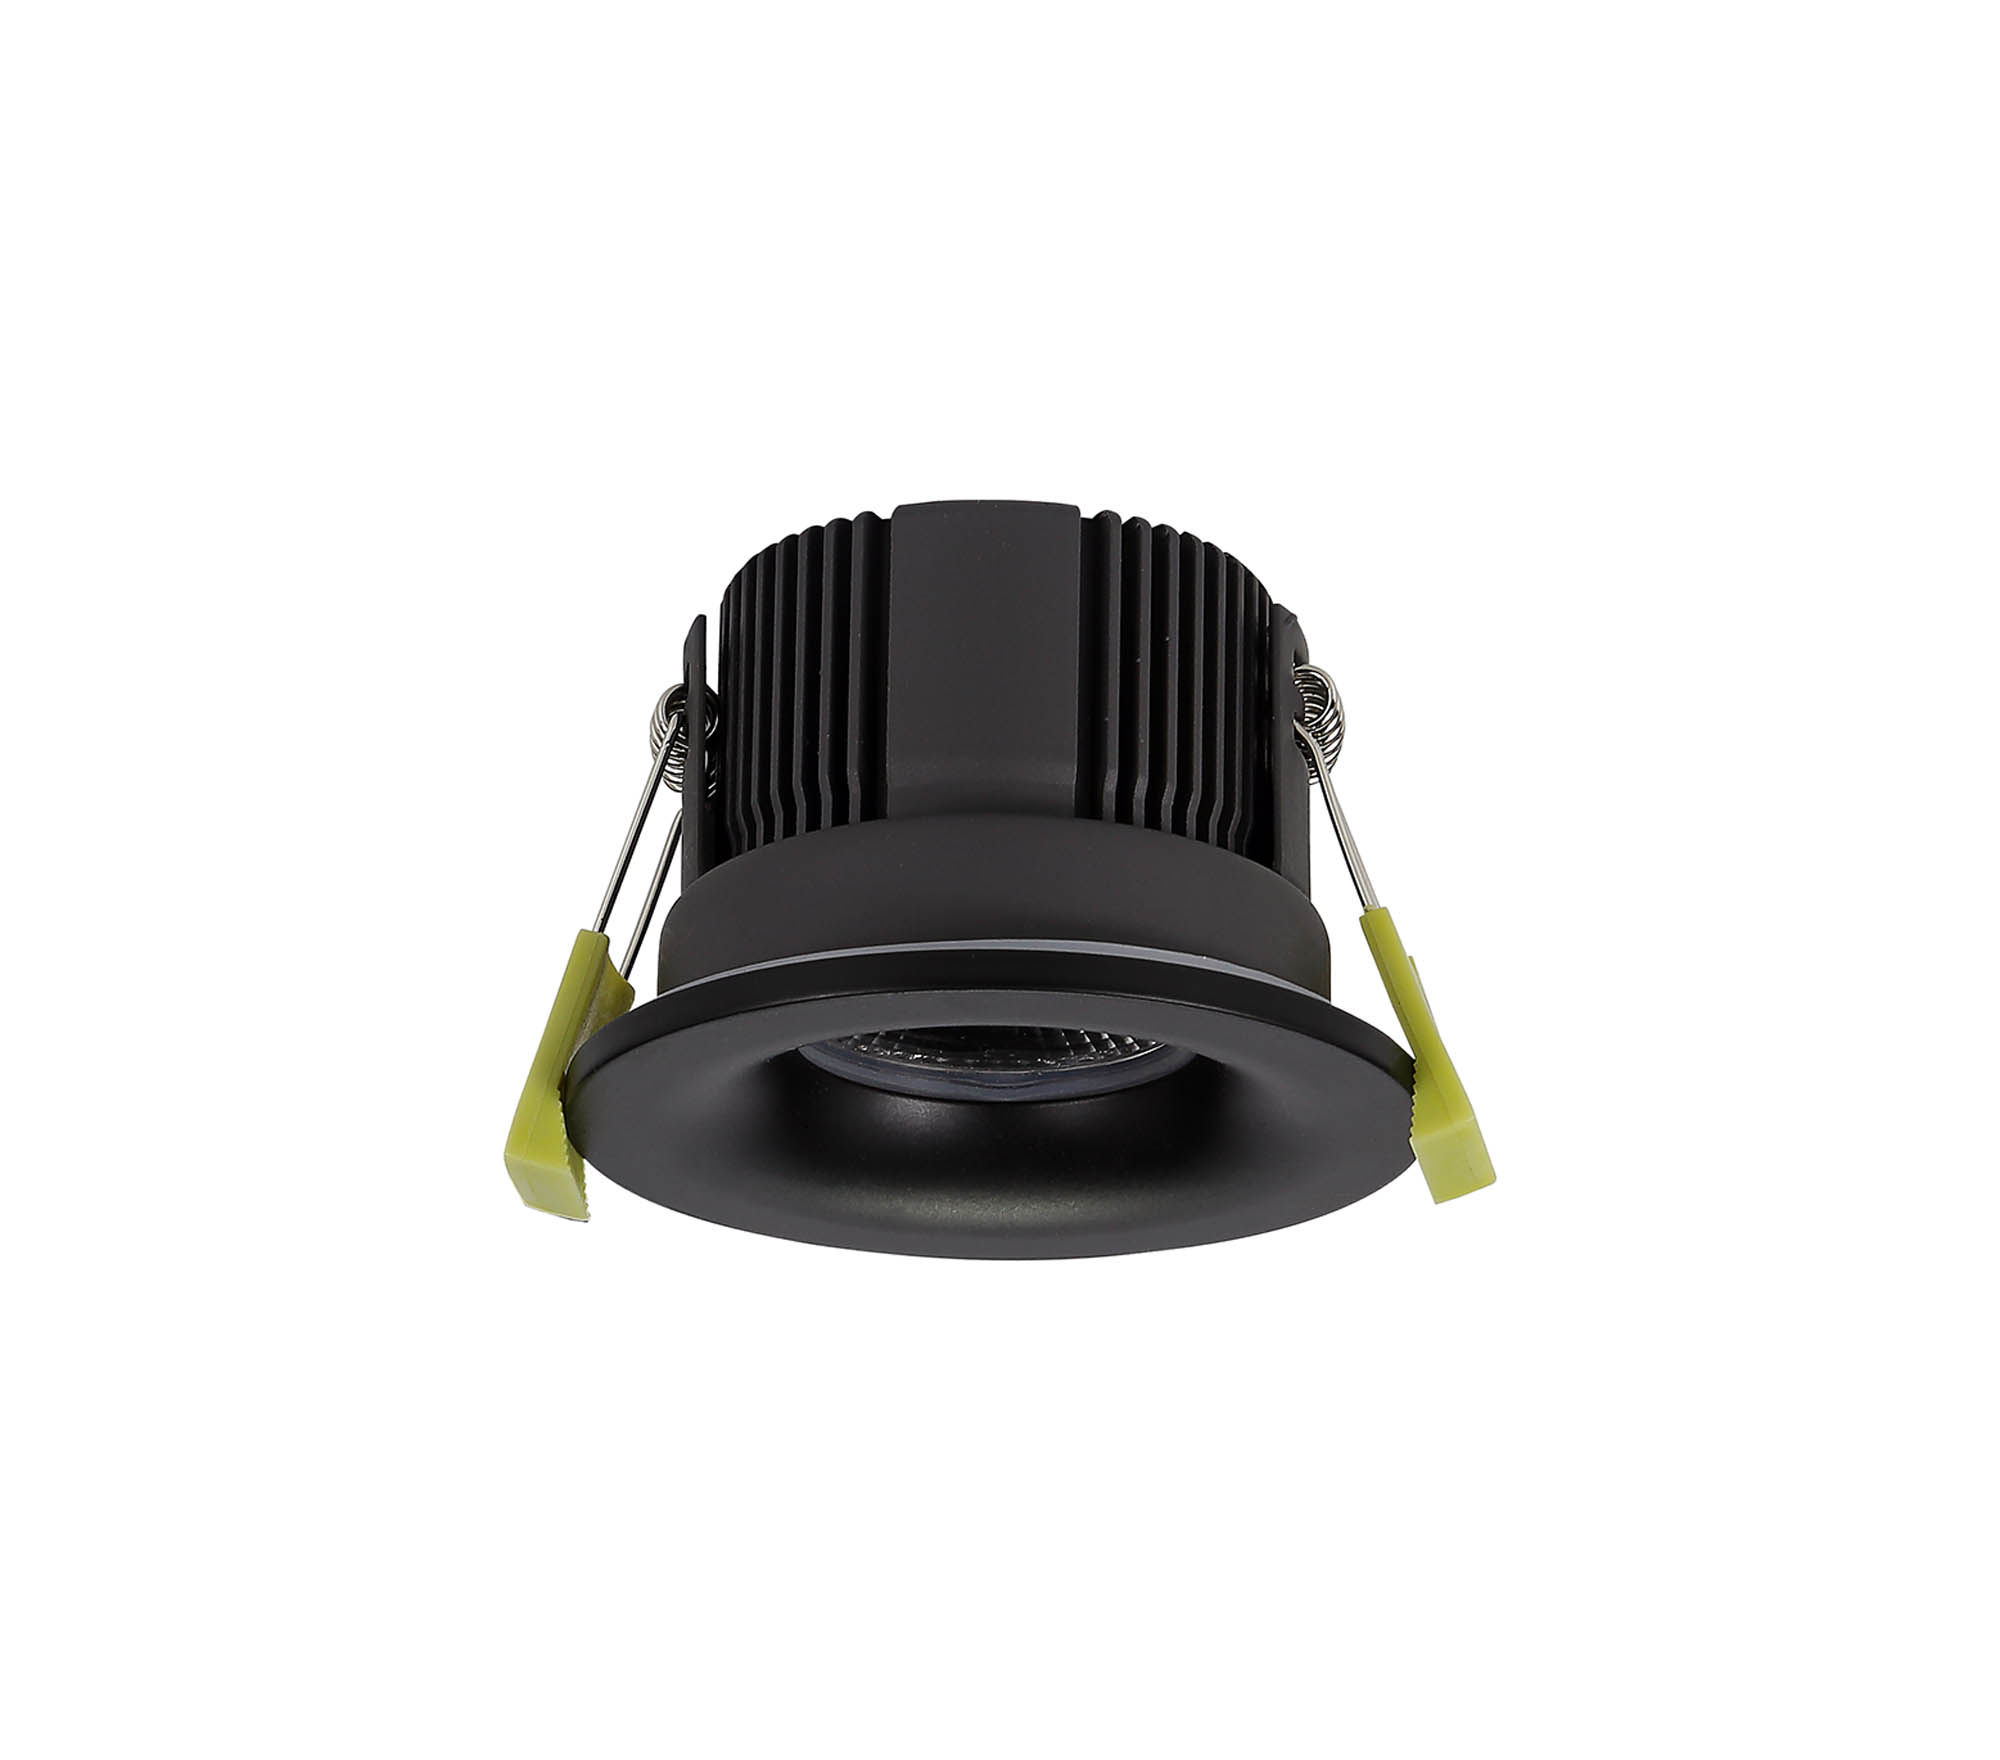 DM200683  Beck 11 FR; 11W; IP65 Matt Black LED Recessed Curved Fire Rated Downlight; Cut Out 68mm; 2700K; PLUG IN DRIVER INCLUDED; 3yrs Warranty